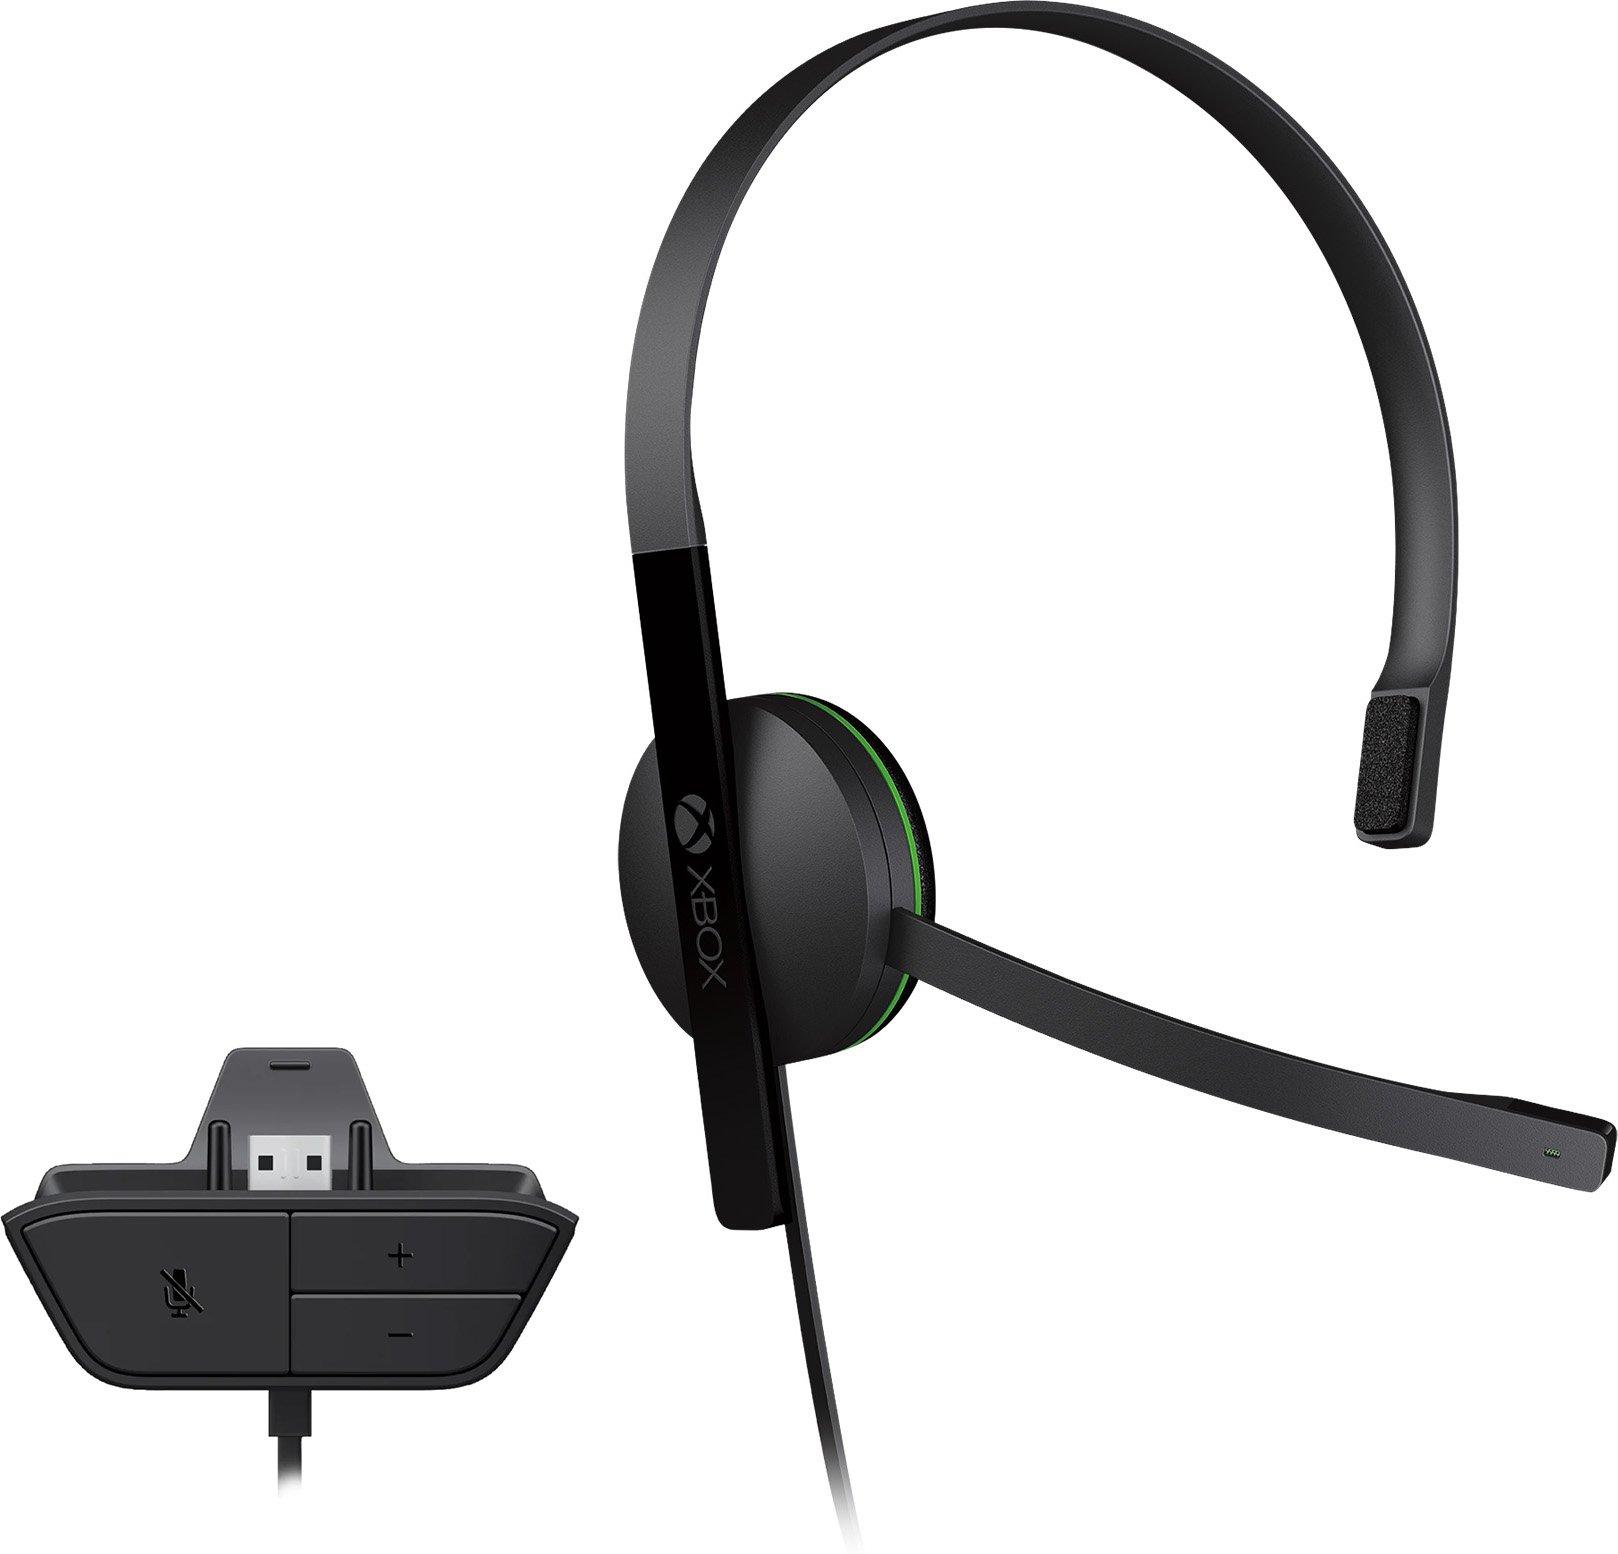 list item 1 of 1 Wired Headset for Xbox One (Assortment)